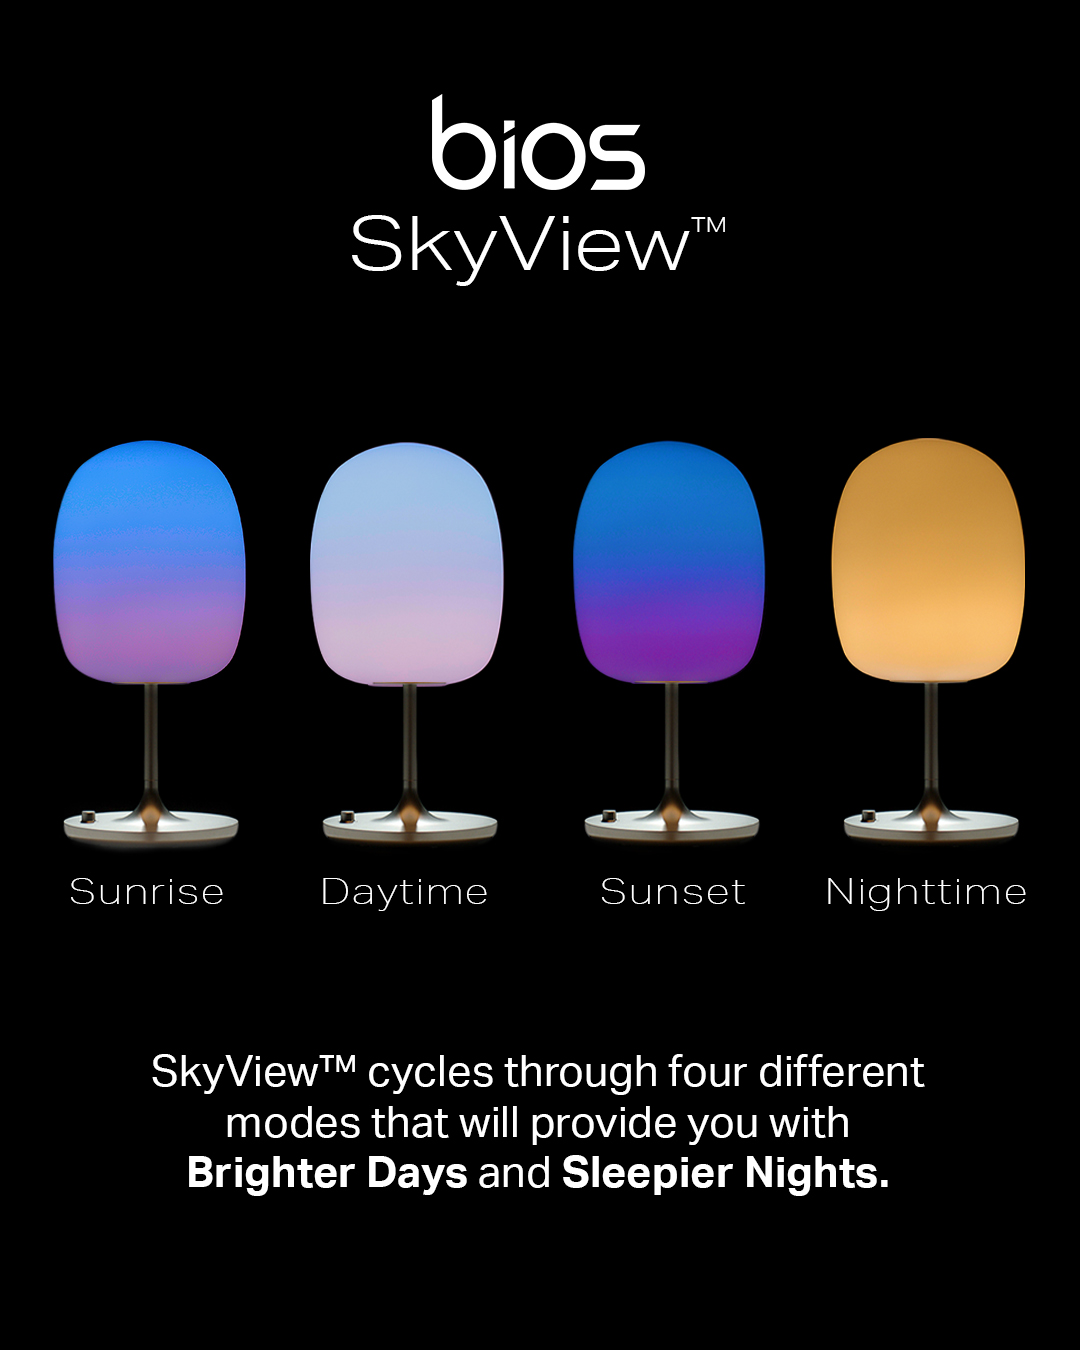 BIOS Lighting on Twitter: "Check out the BIOS SkyView Wellness Table Lamp on "The 10 Best Therapy in 2020" by @Verywellmind More: https://t.co/aFtYOufO5p P.S- Holiday sale on SkyView